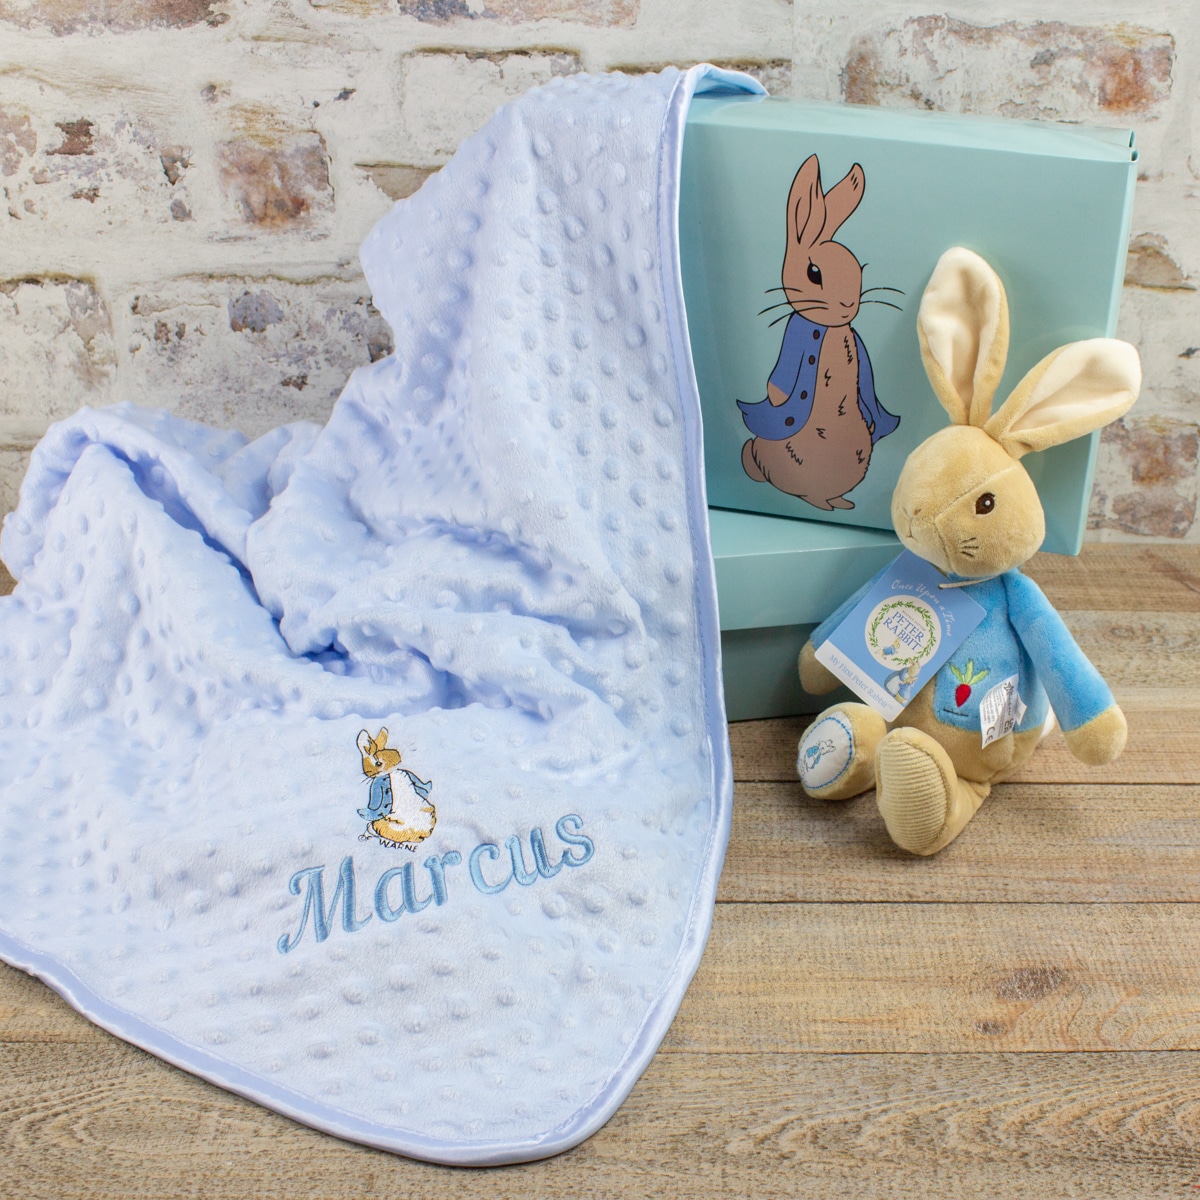 Available in Sizes 0-3 Boys Peter Rabbit & Blanket Personalised Printed 100% Double Layered Cotton Baby Hat 3-6 and 6-12 Months Max 13 Letters Printed with The Name of Your Choice 